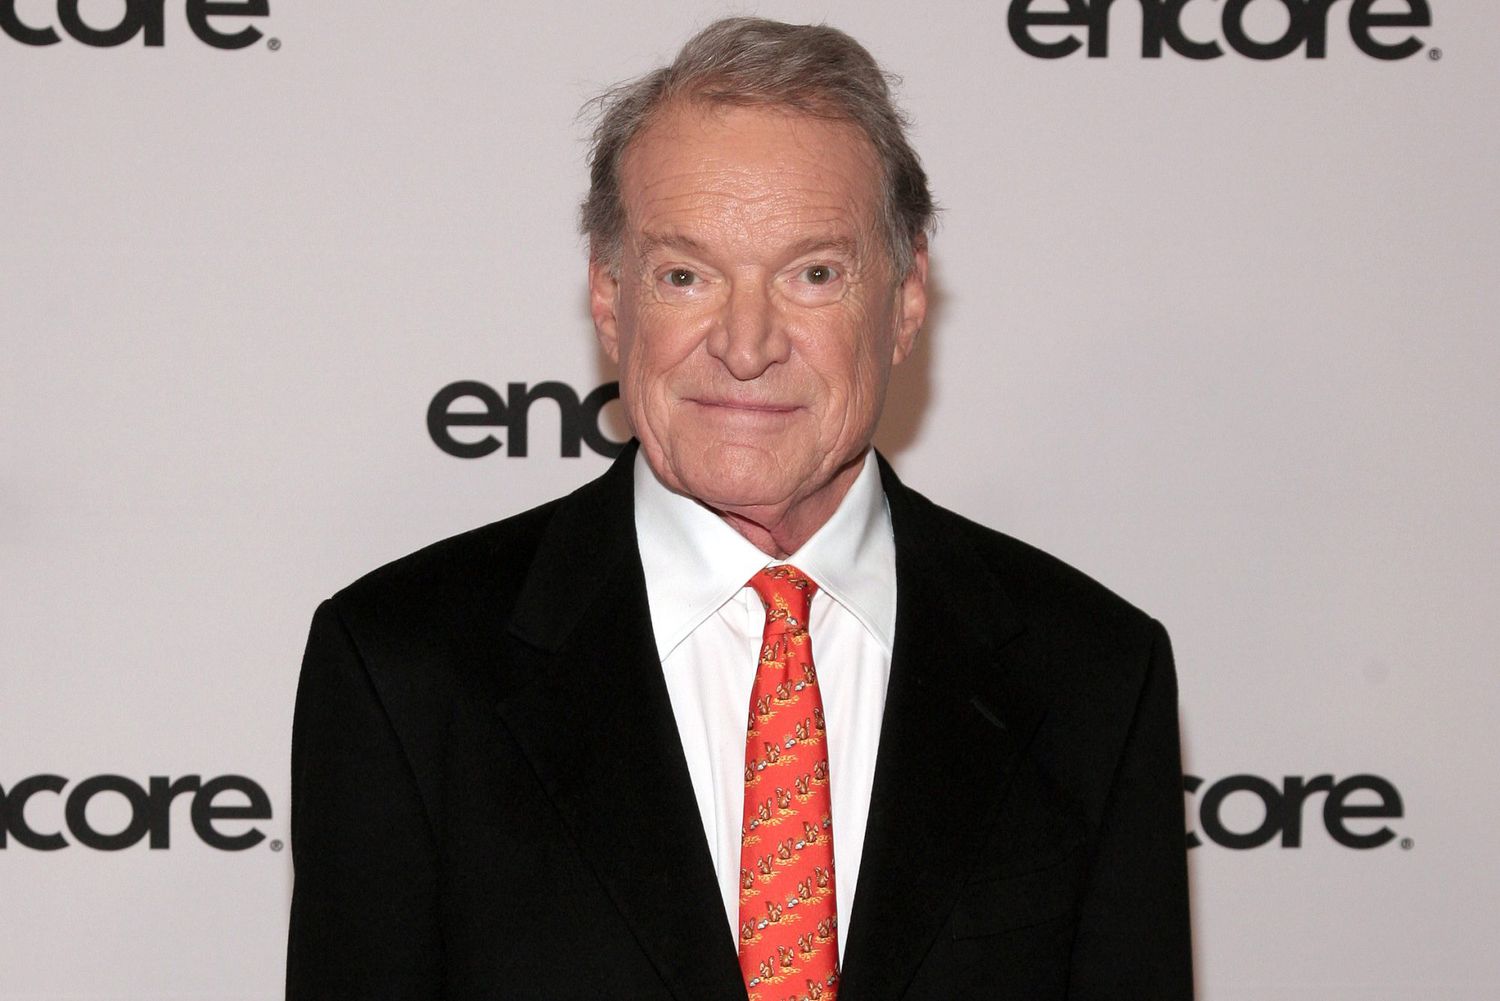 Mandatory Credit: Photo by Andy Kropa/Invision/AP/Shutterstock (9052523n) Actor Charles Kimbrough attends "Murphy Brown: A 25th Anniversary Event" presented by ENCORE, in New York ENCORE Presents Murphy Brown: A 25th Anniversary Event, New York, USA